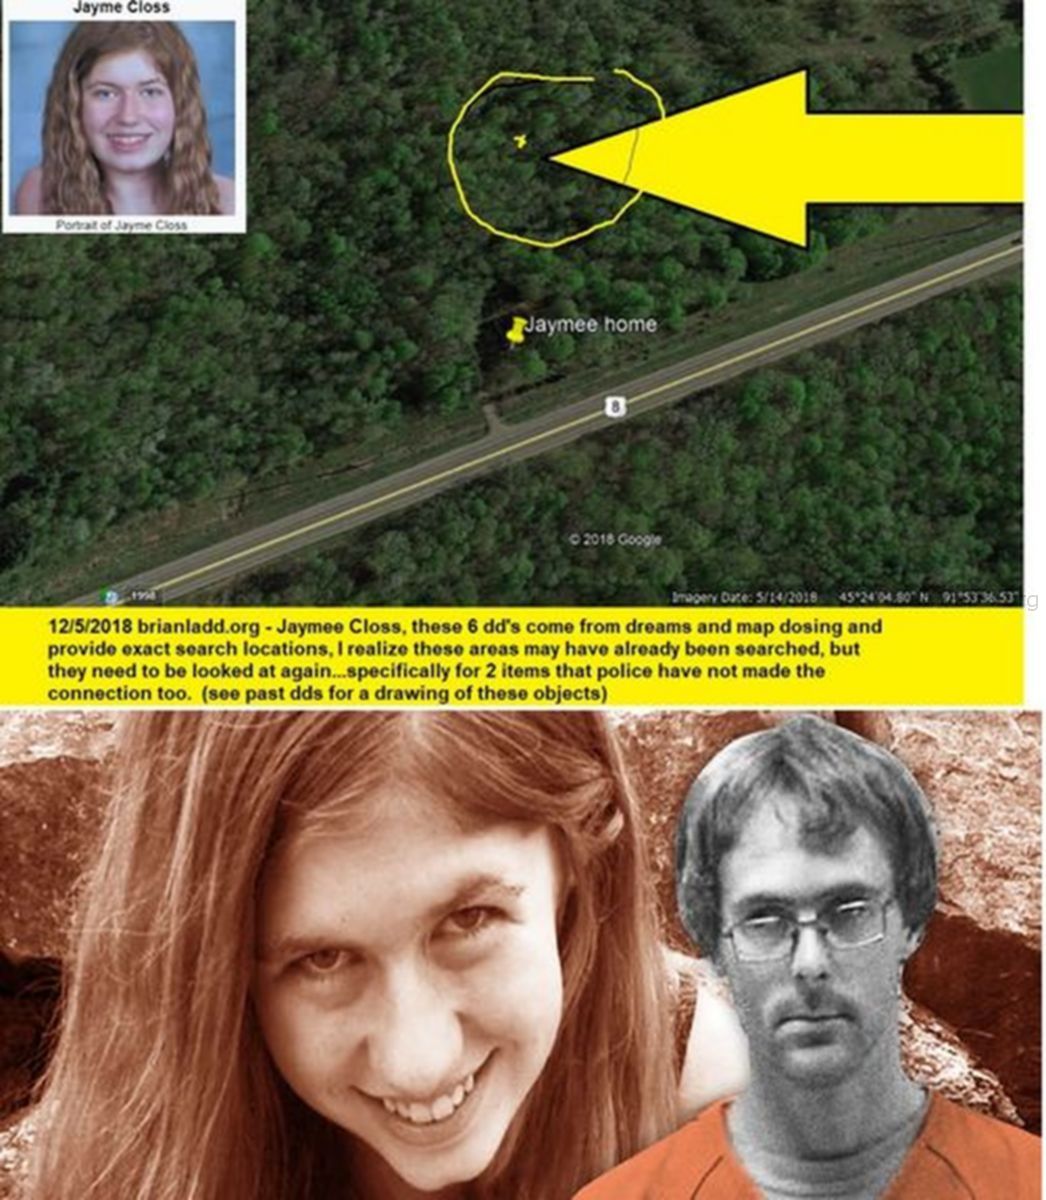 Jaymee Closs Missing 11412 5 December 2018 5 - 12/5/2018 BrianLadd.Org - Jaymee Closs, These 6 Dd'S Come From Dream...
12/5/2018 BrianLadd.Org - Jaymee Closs, These 6 Dd'S Come From Dreams And Map Dosing And Provide Exact Search Locations, I Realize These Areas May Have Already Been Searched, But They Need To Be Looked At Again  Specifically For 2 Items That Police Have Not Made The Connection Too.  (see Past Dds For A Drawing Of These Objects)
